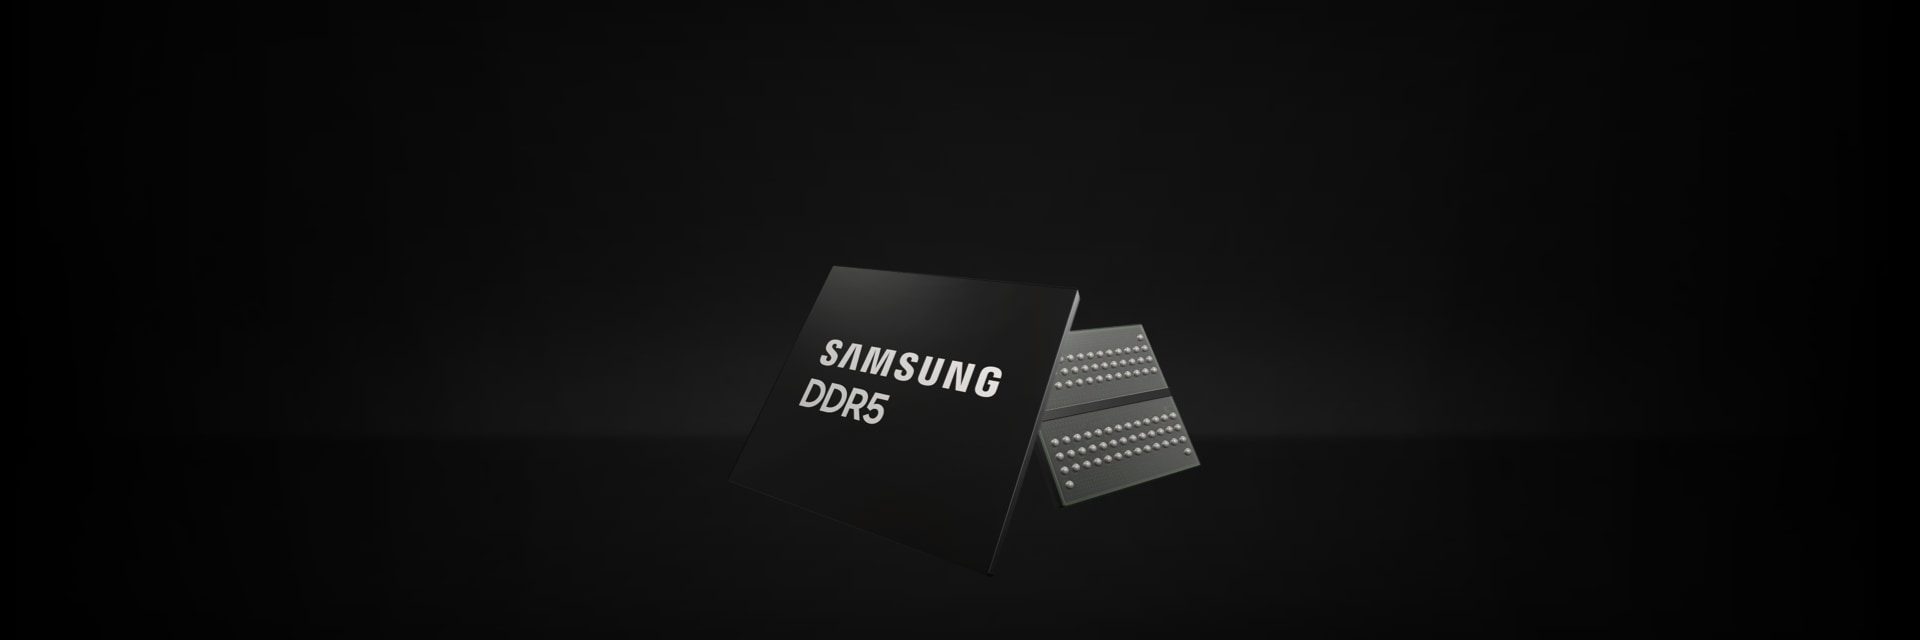 Samsung DDR 5, DDR4 and DDR3 solutions.